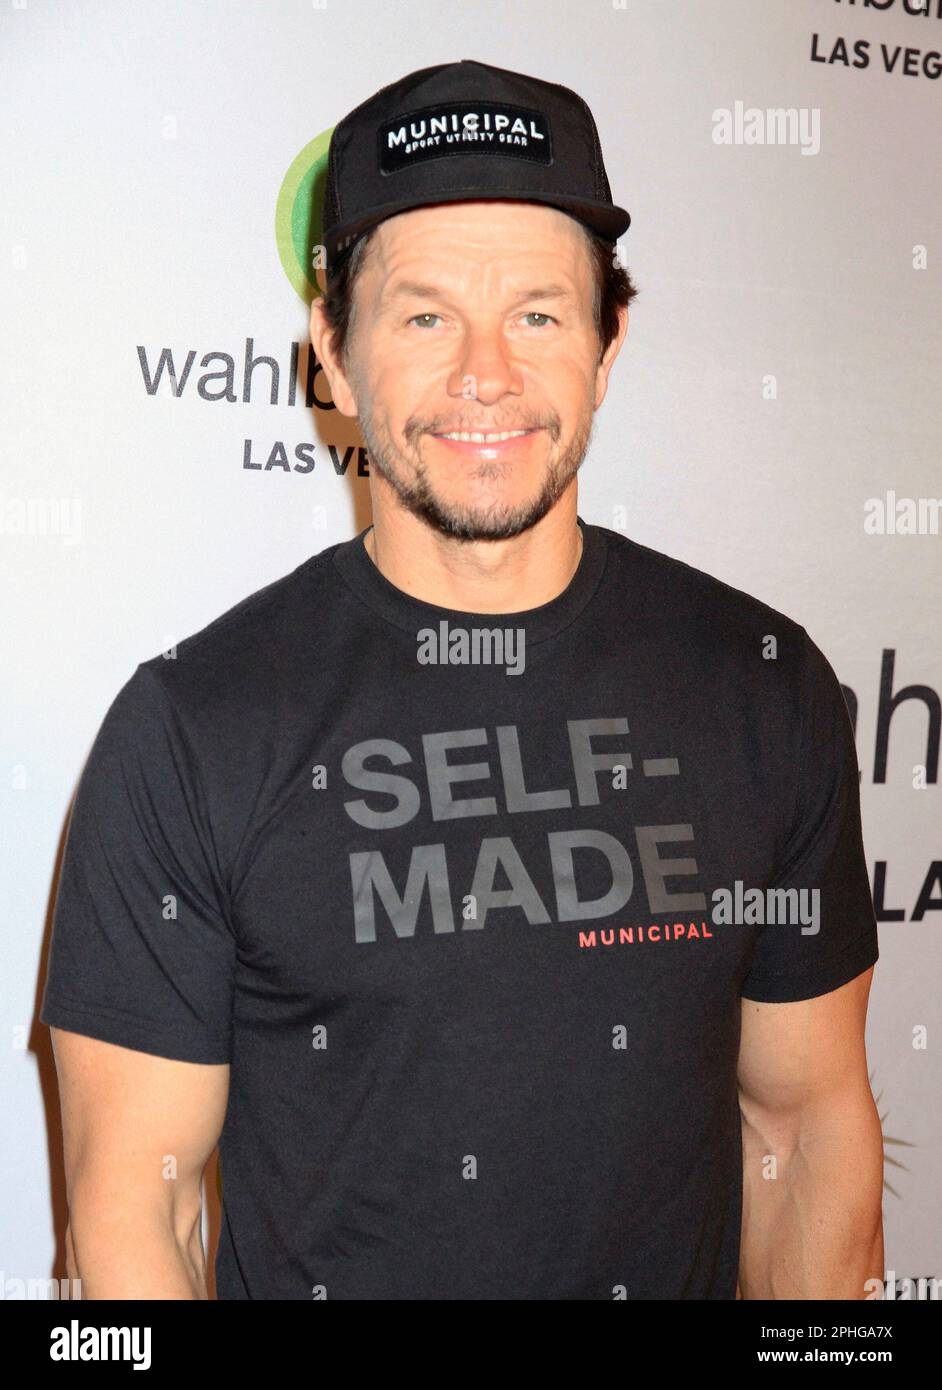 Photo by: Raoul Gatchalian/STAR MAX/IPx 2023 3/27/23 Mark Wahlberg at Walhburgers Grand Opening Party at Mandalay Place on March 27, 2023 in Las Vegas, Nevada. Stock Photo